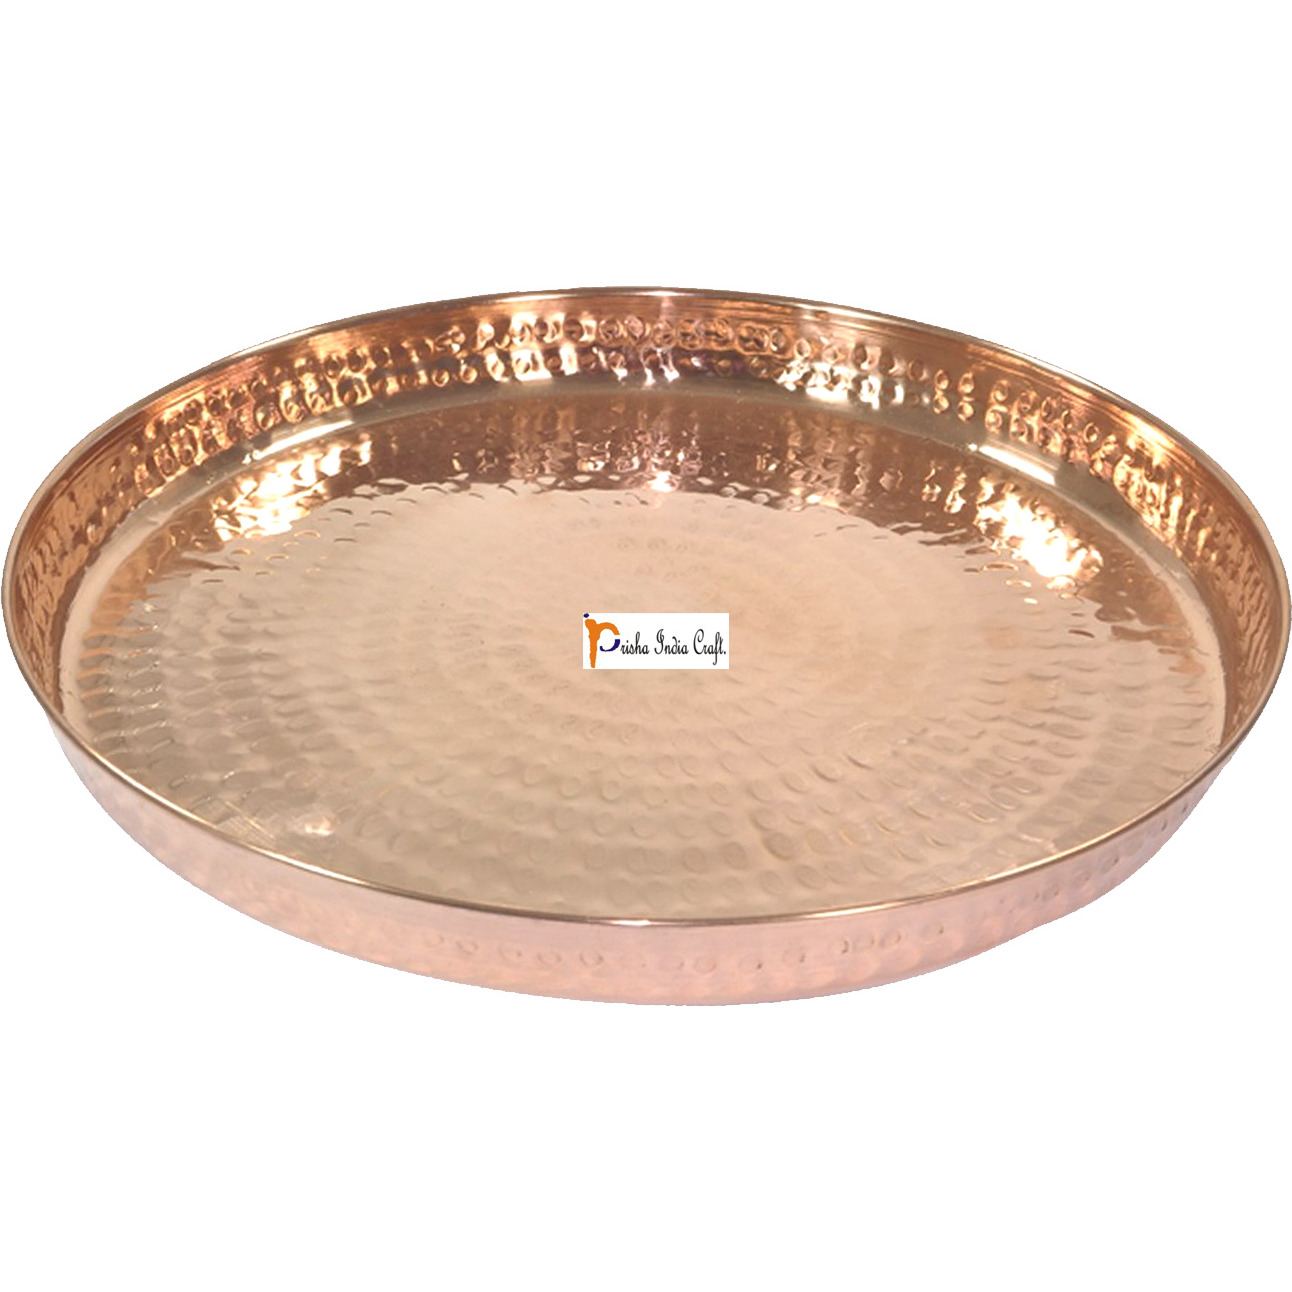 Set of 6 Prisha India Craft B. Handmade Indian Dinnerware Pure Copper Thali Set Dia 12  Traditional Dinner Set of Plate, Bowl, Spoons, Glass with Napkin ring and Coaster - Christmas Gift